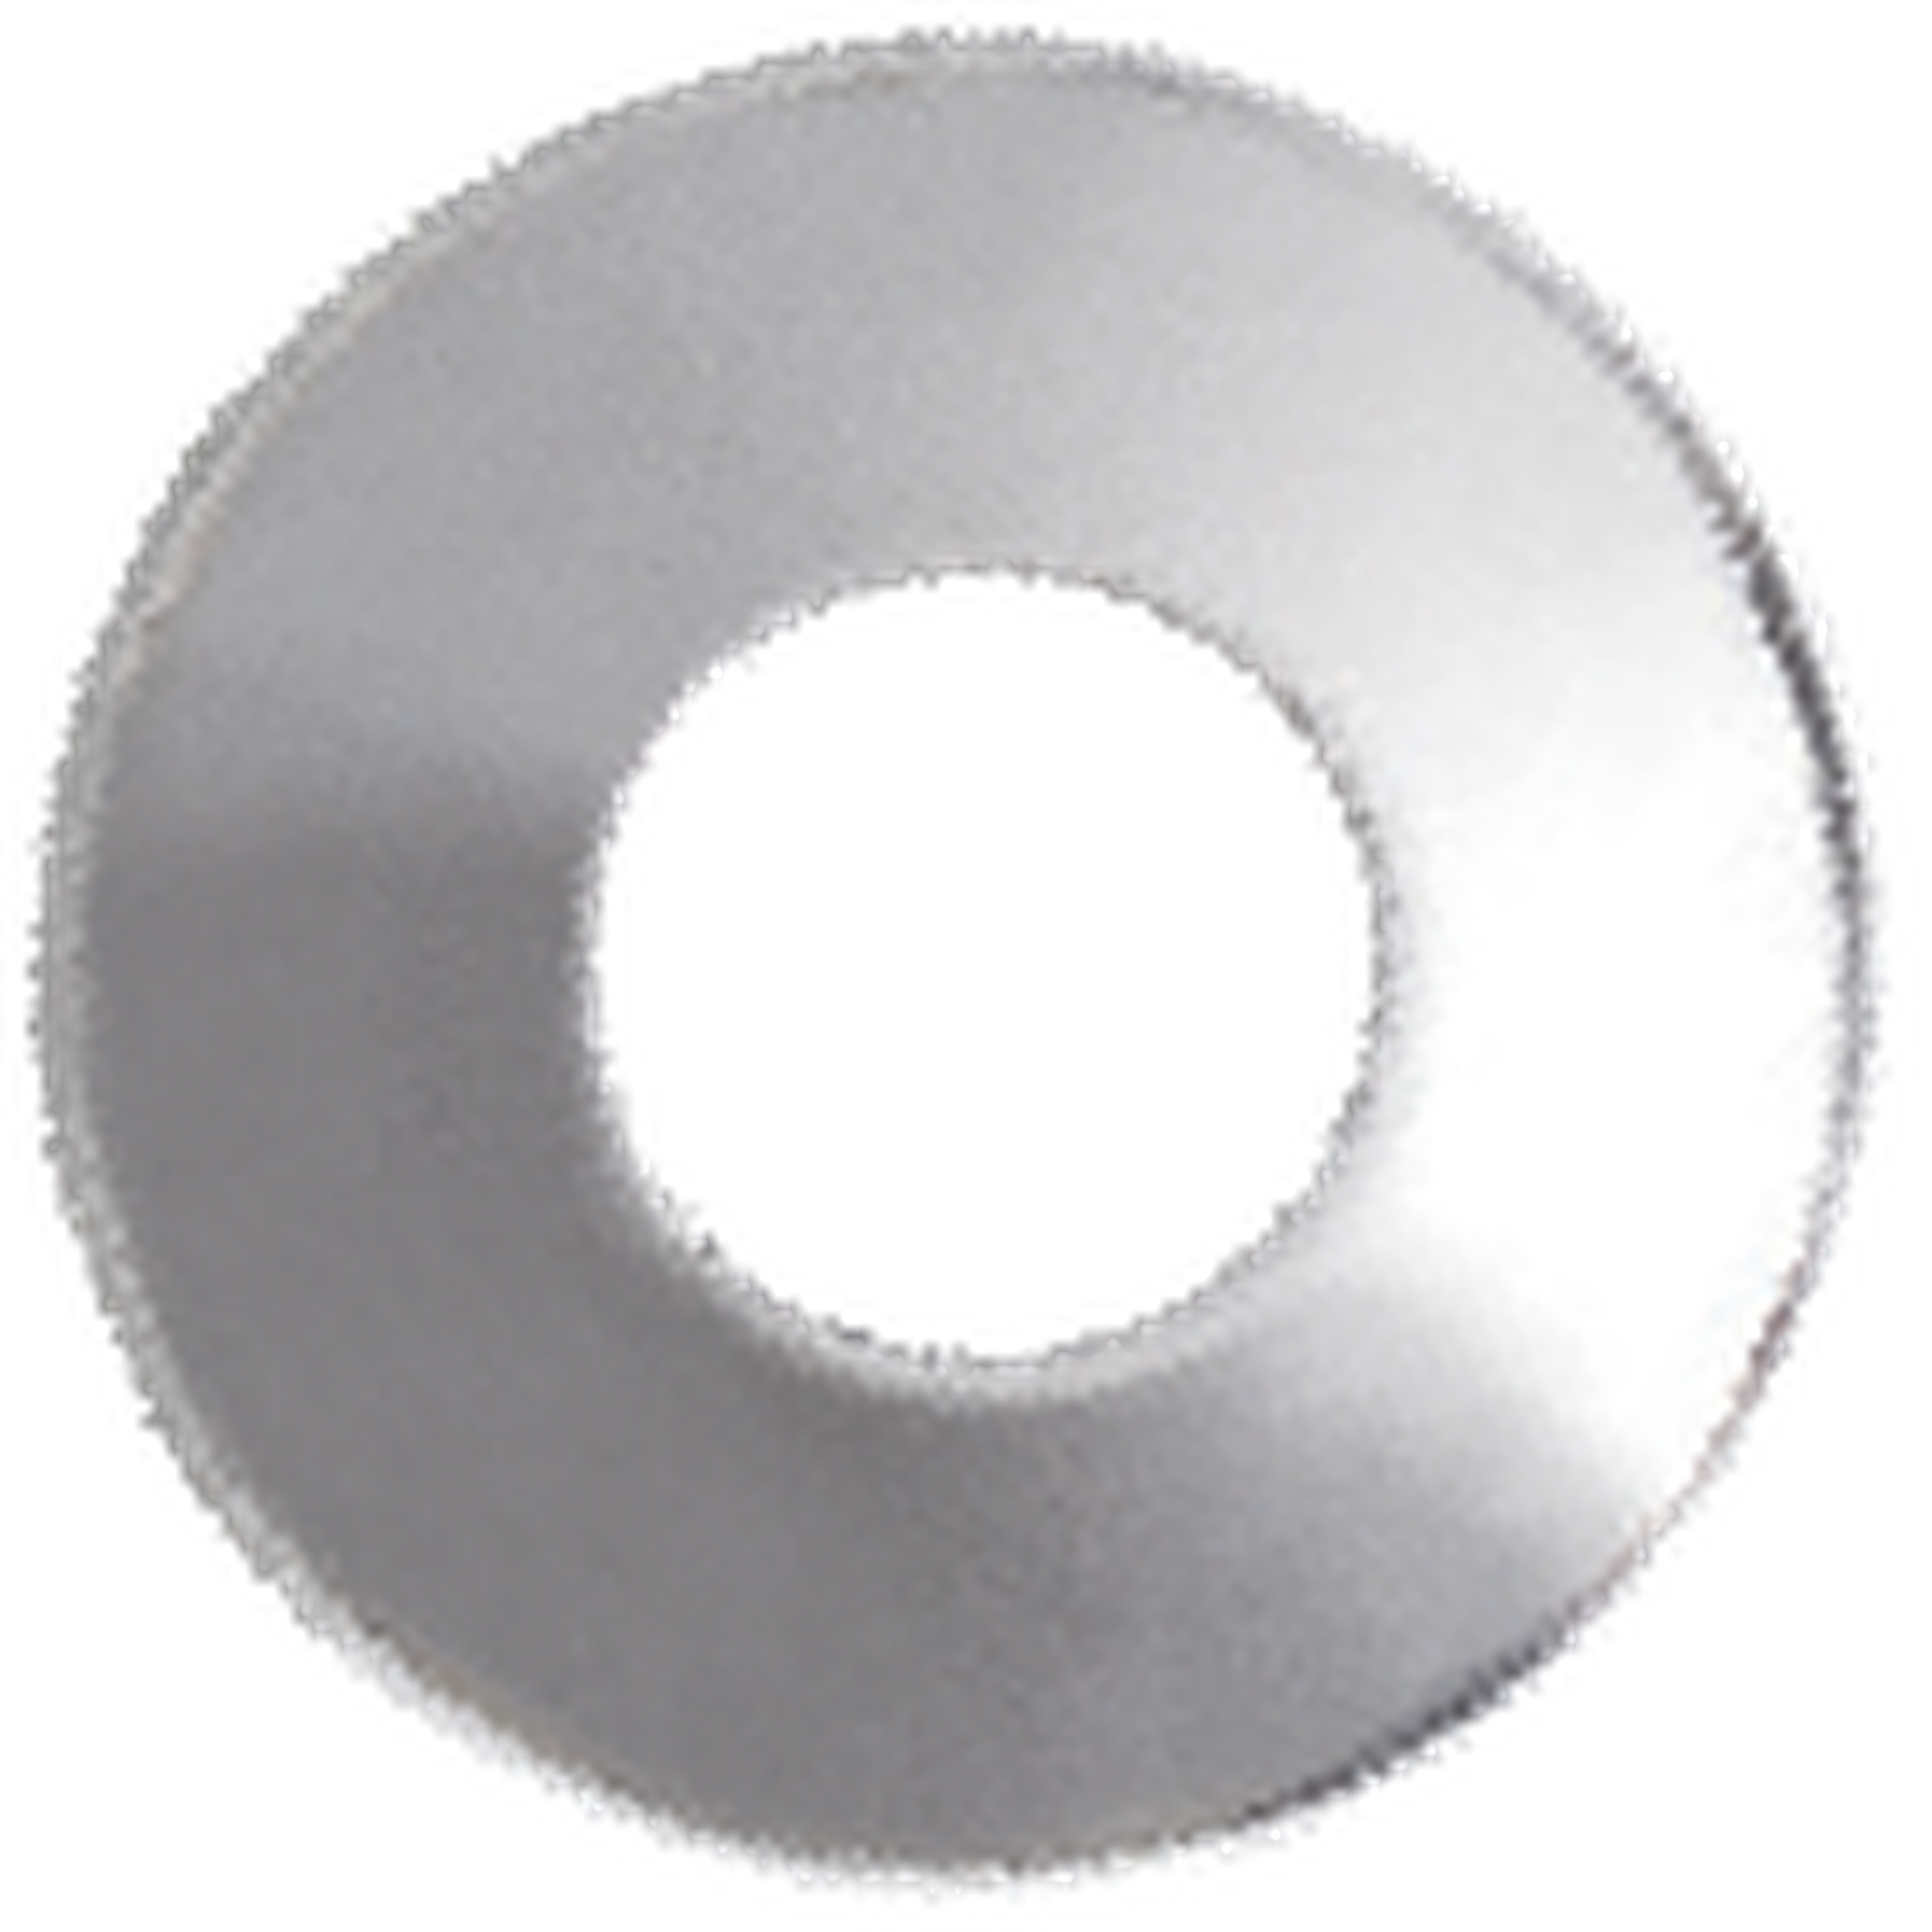 Seachrome Conorado Series Polished Stainless Steel 1.5" Diameter Exposed Mounting Flange Door Bumper